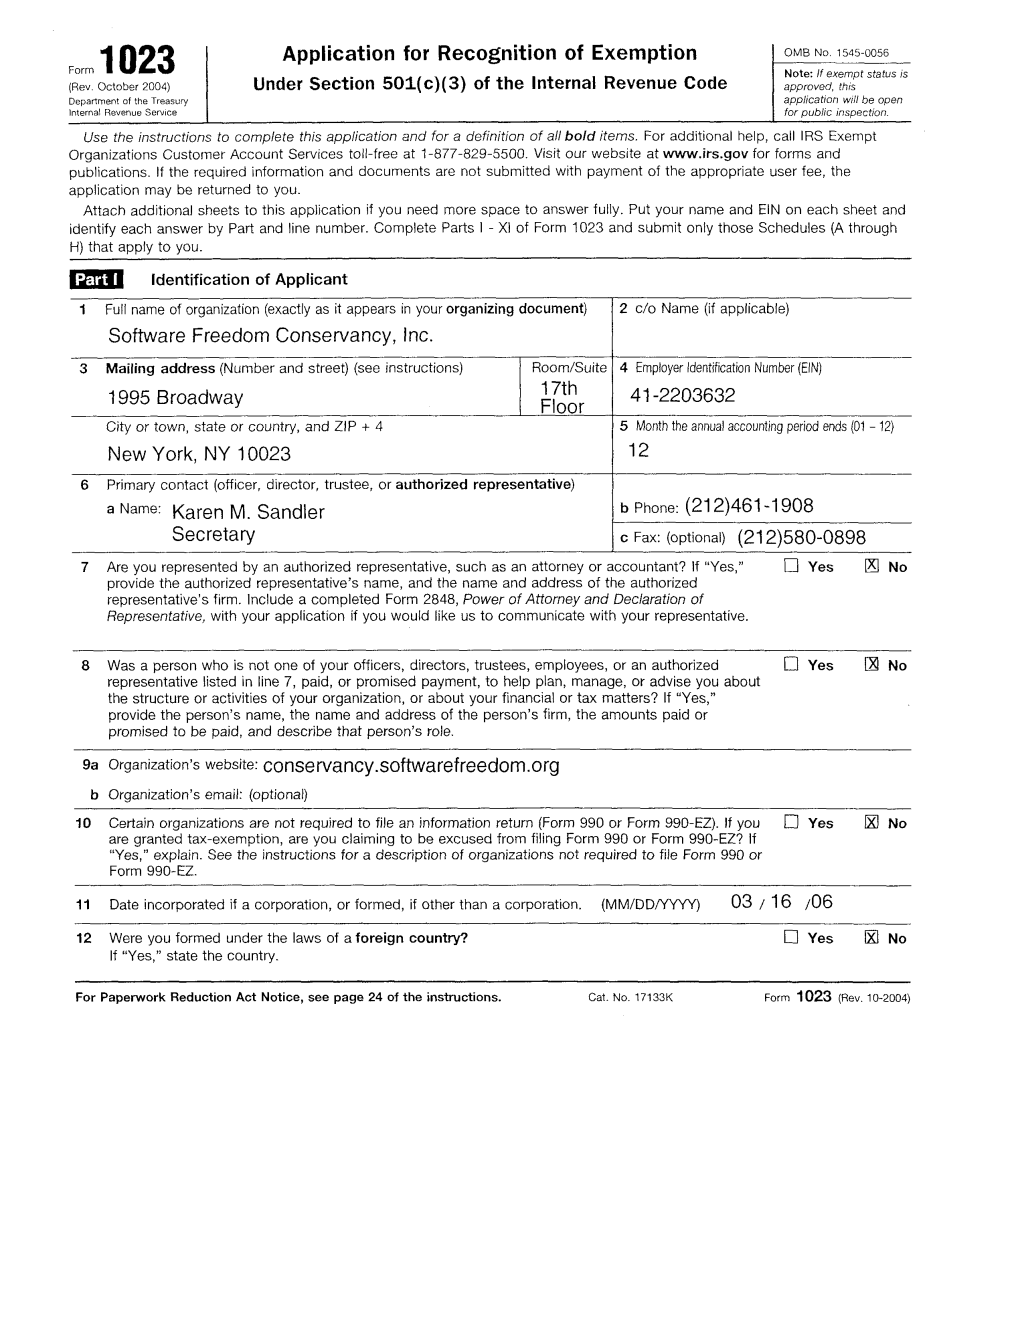 Our Form 1023 with the USA